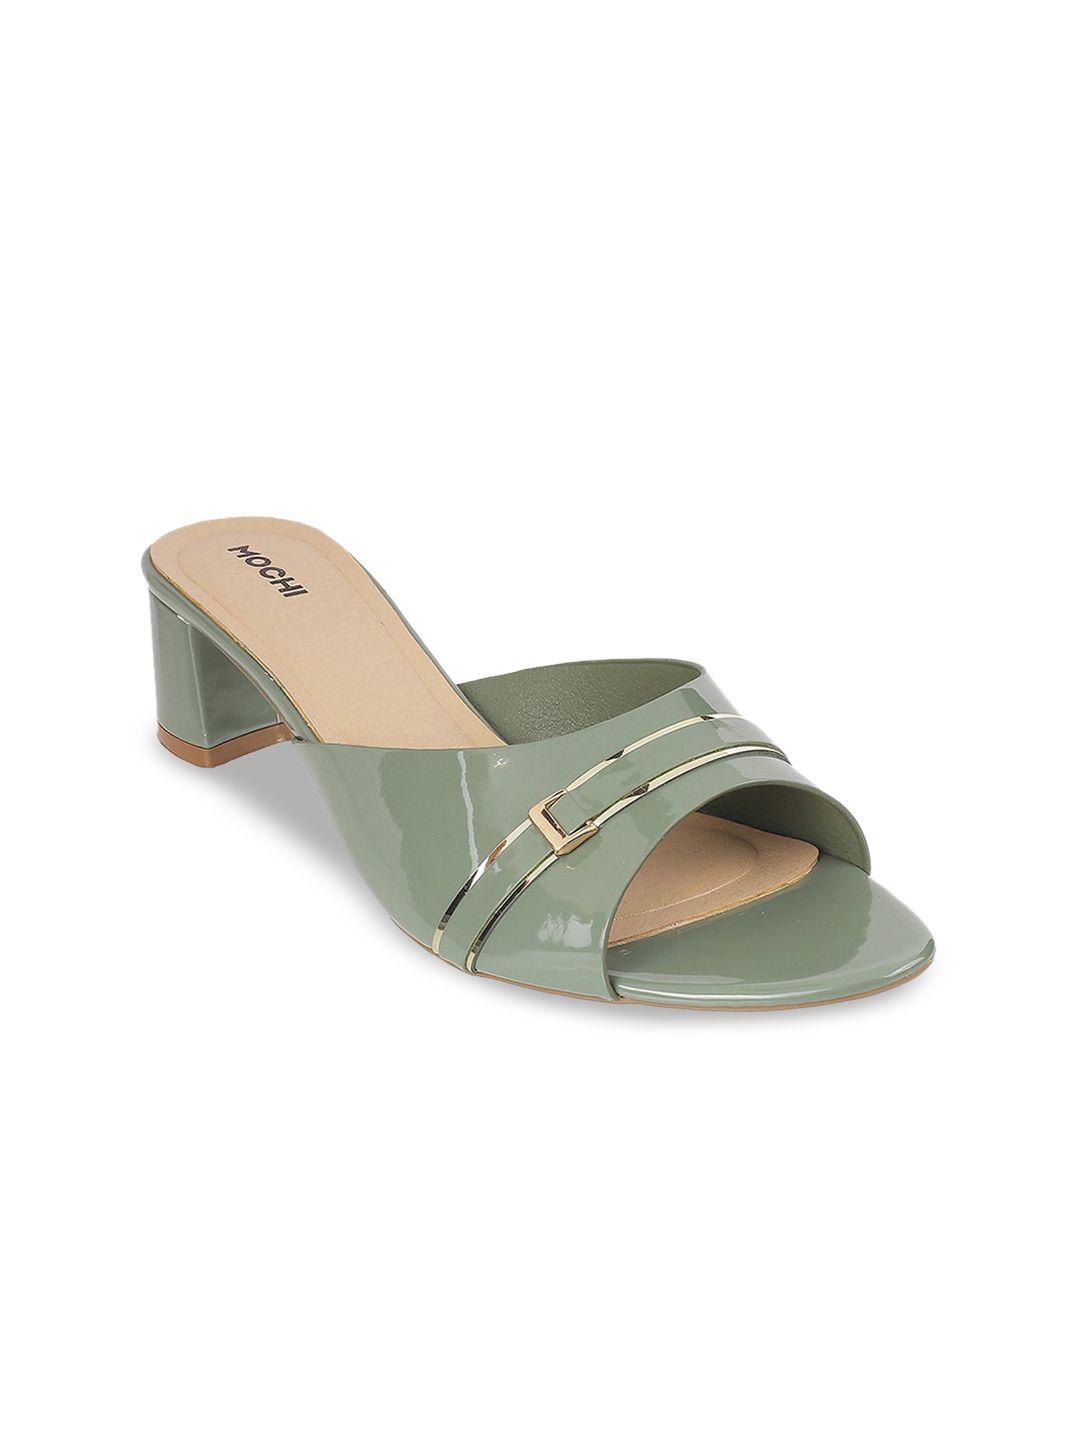 mochi green block sandals with buckles